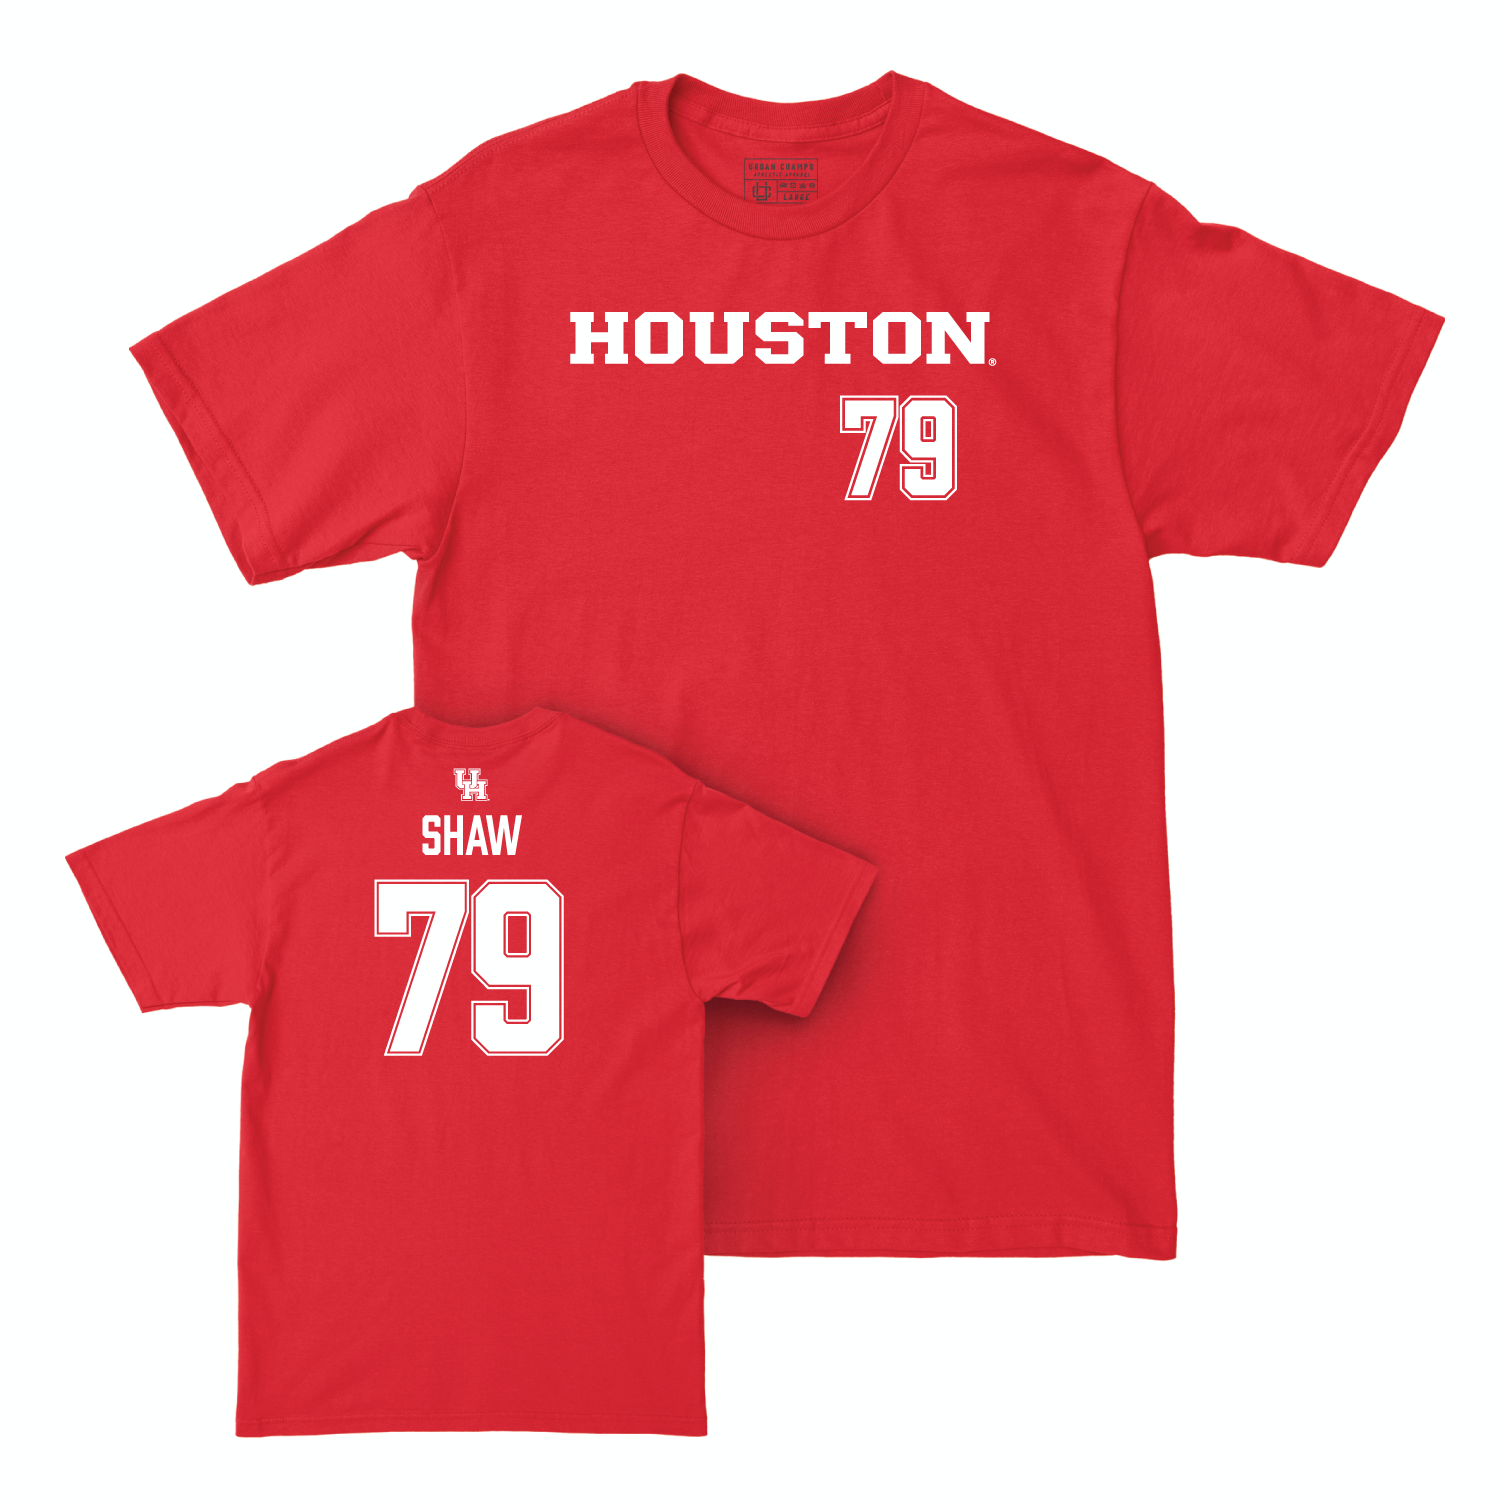 Houston Football Red Sideline Tee - Tevin Shaw Small